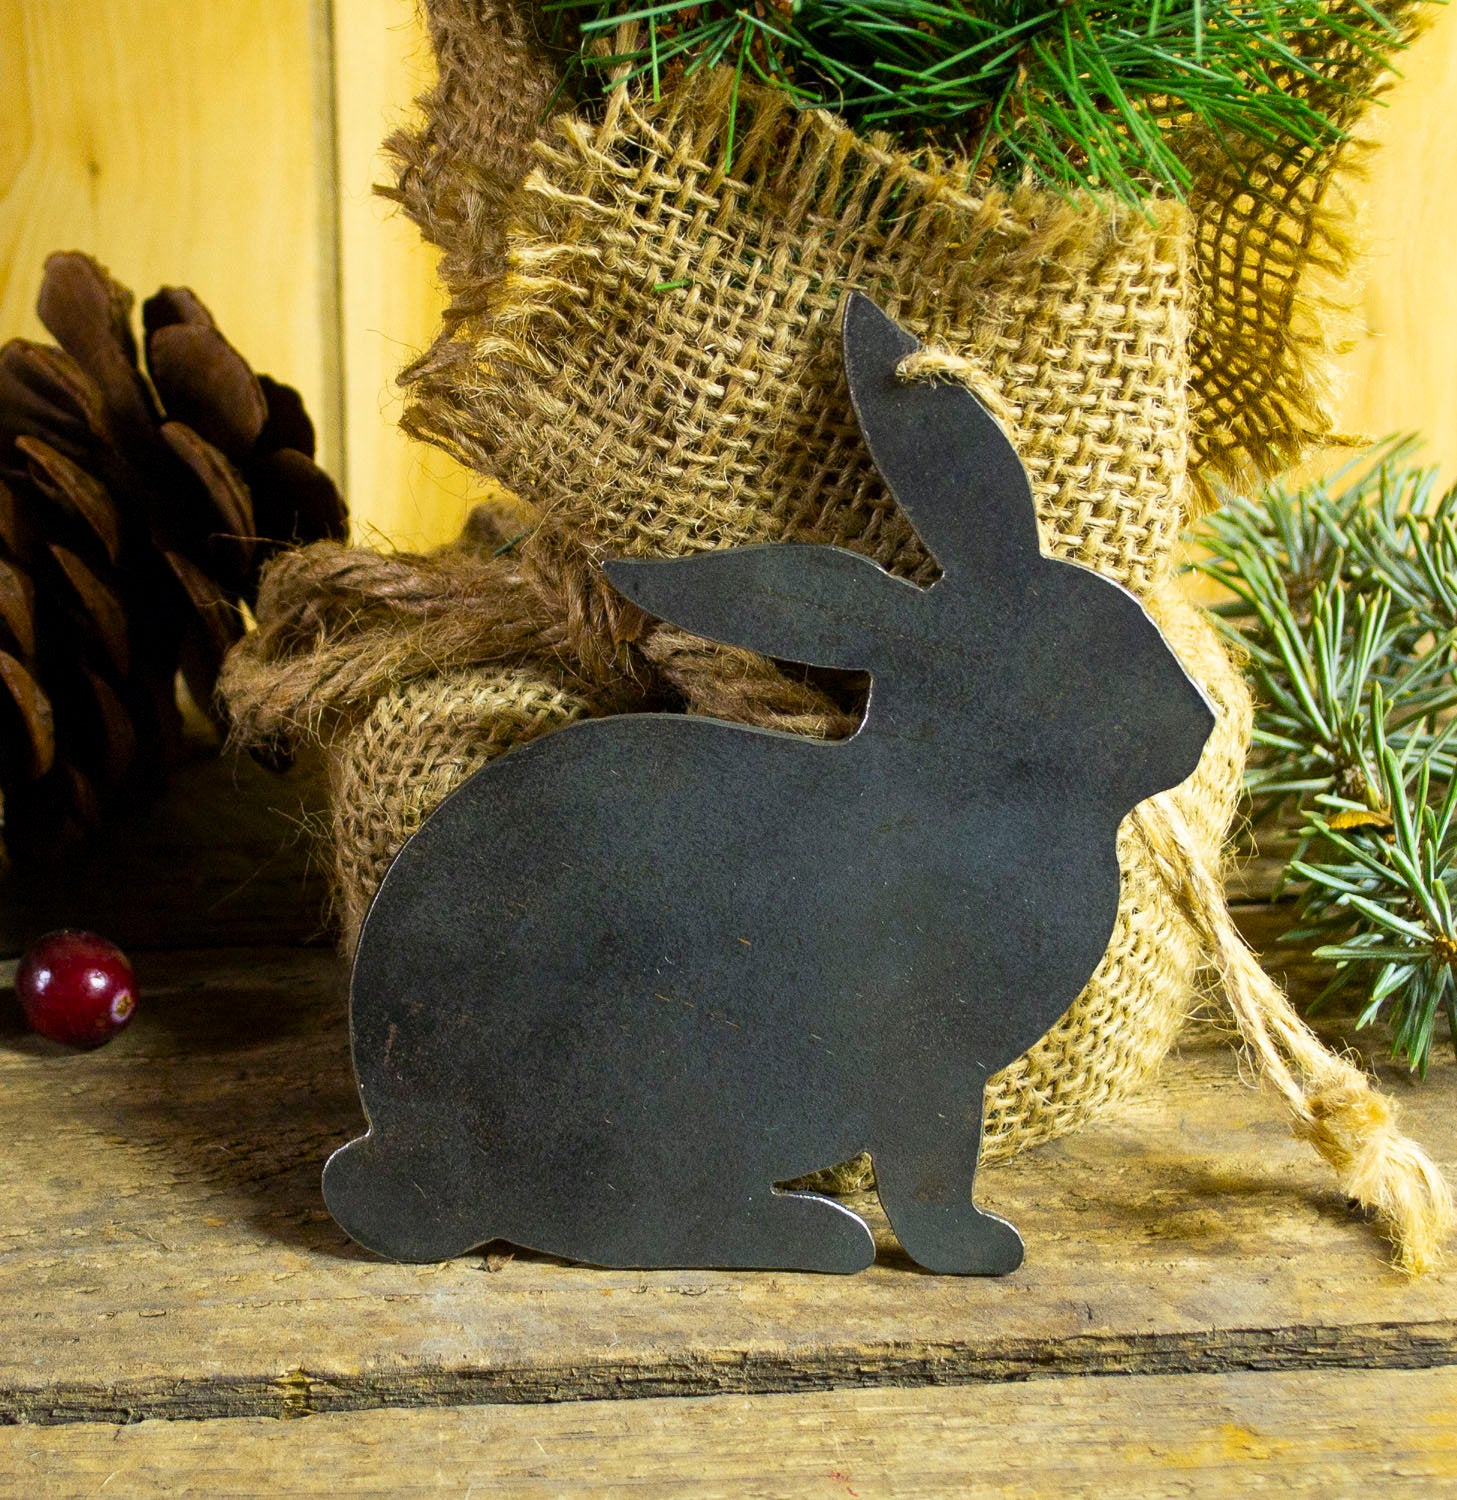 Bunny Rabbit Metal Christmas Ornament Tree Stocking Stuffer Party Favor Holiday Decoration Raw Steel Gift Recycled Nature Home Decor